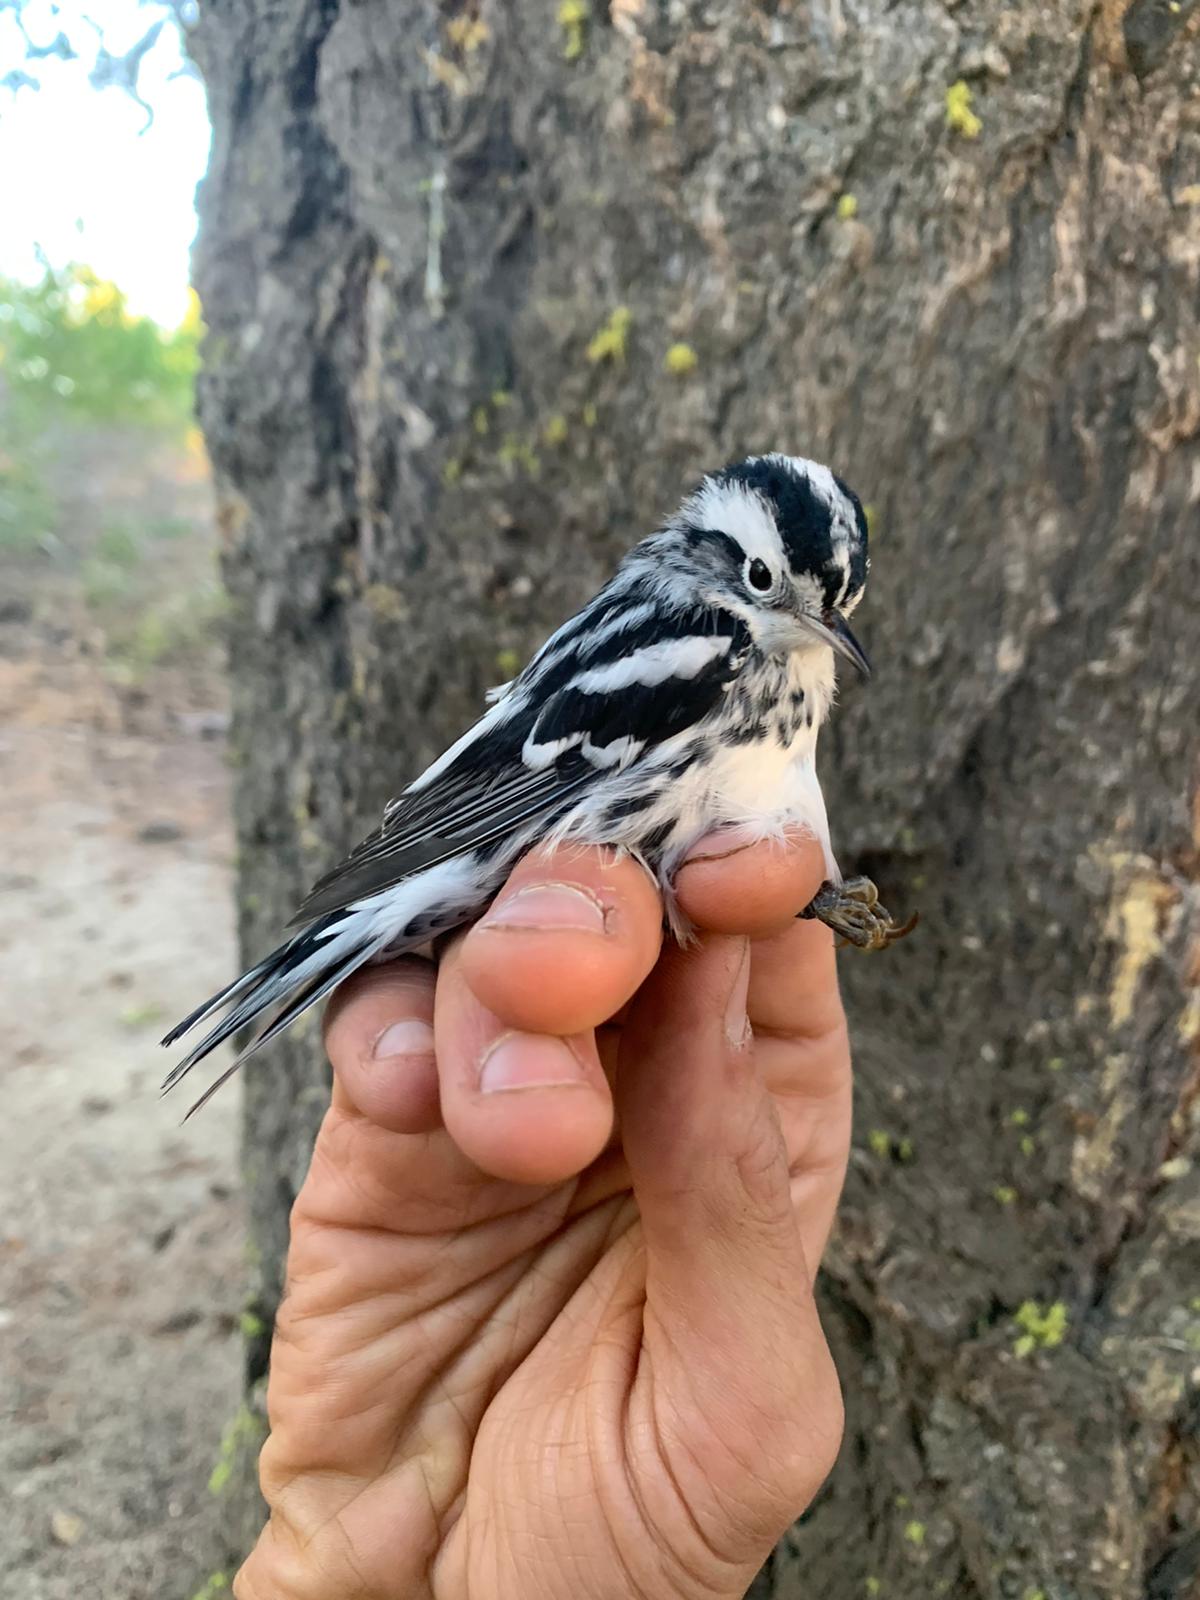 a small black and white striped songbird is held gently by a biologists hand